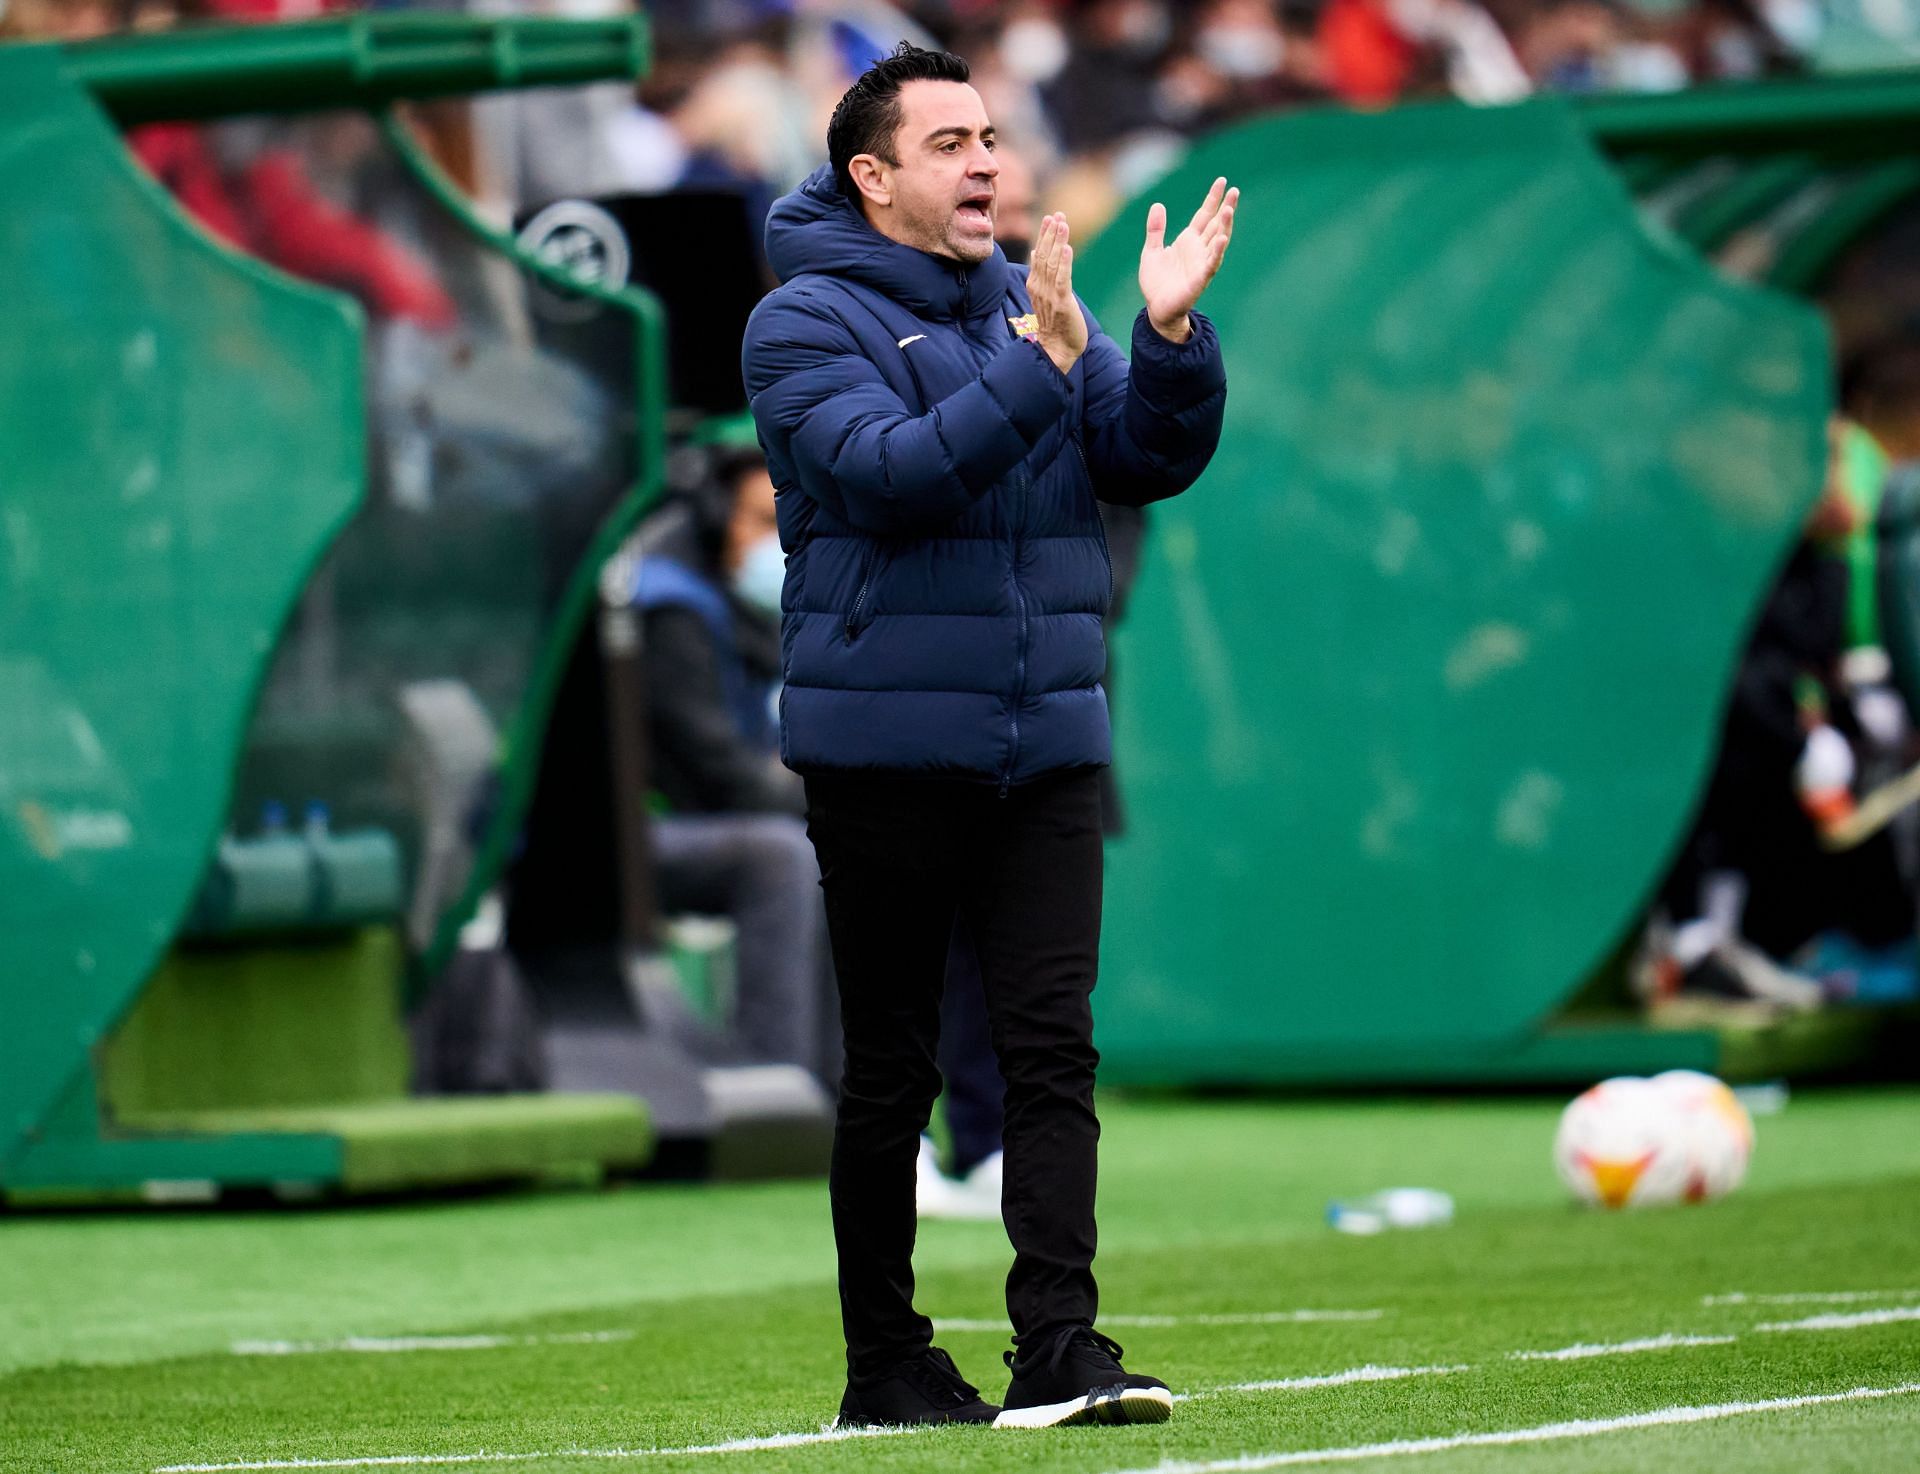 Xavi currently serves as the manager of Barcelona